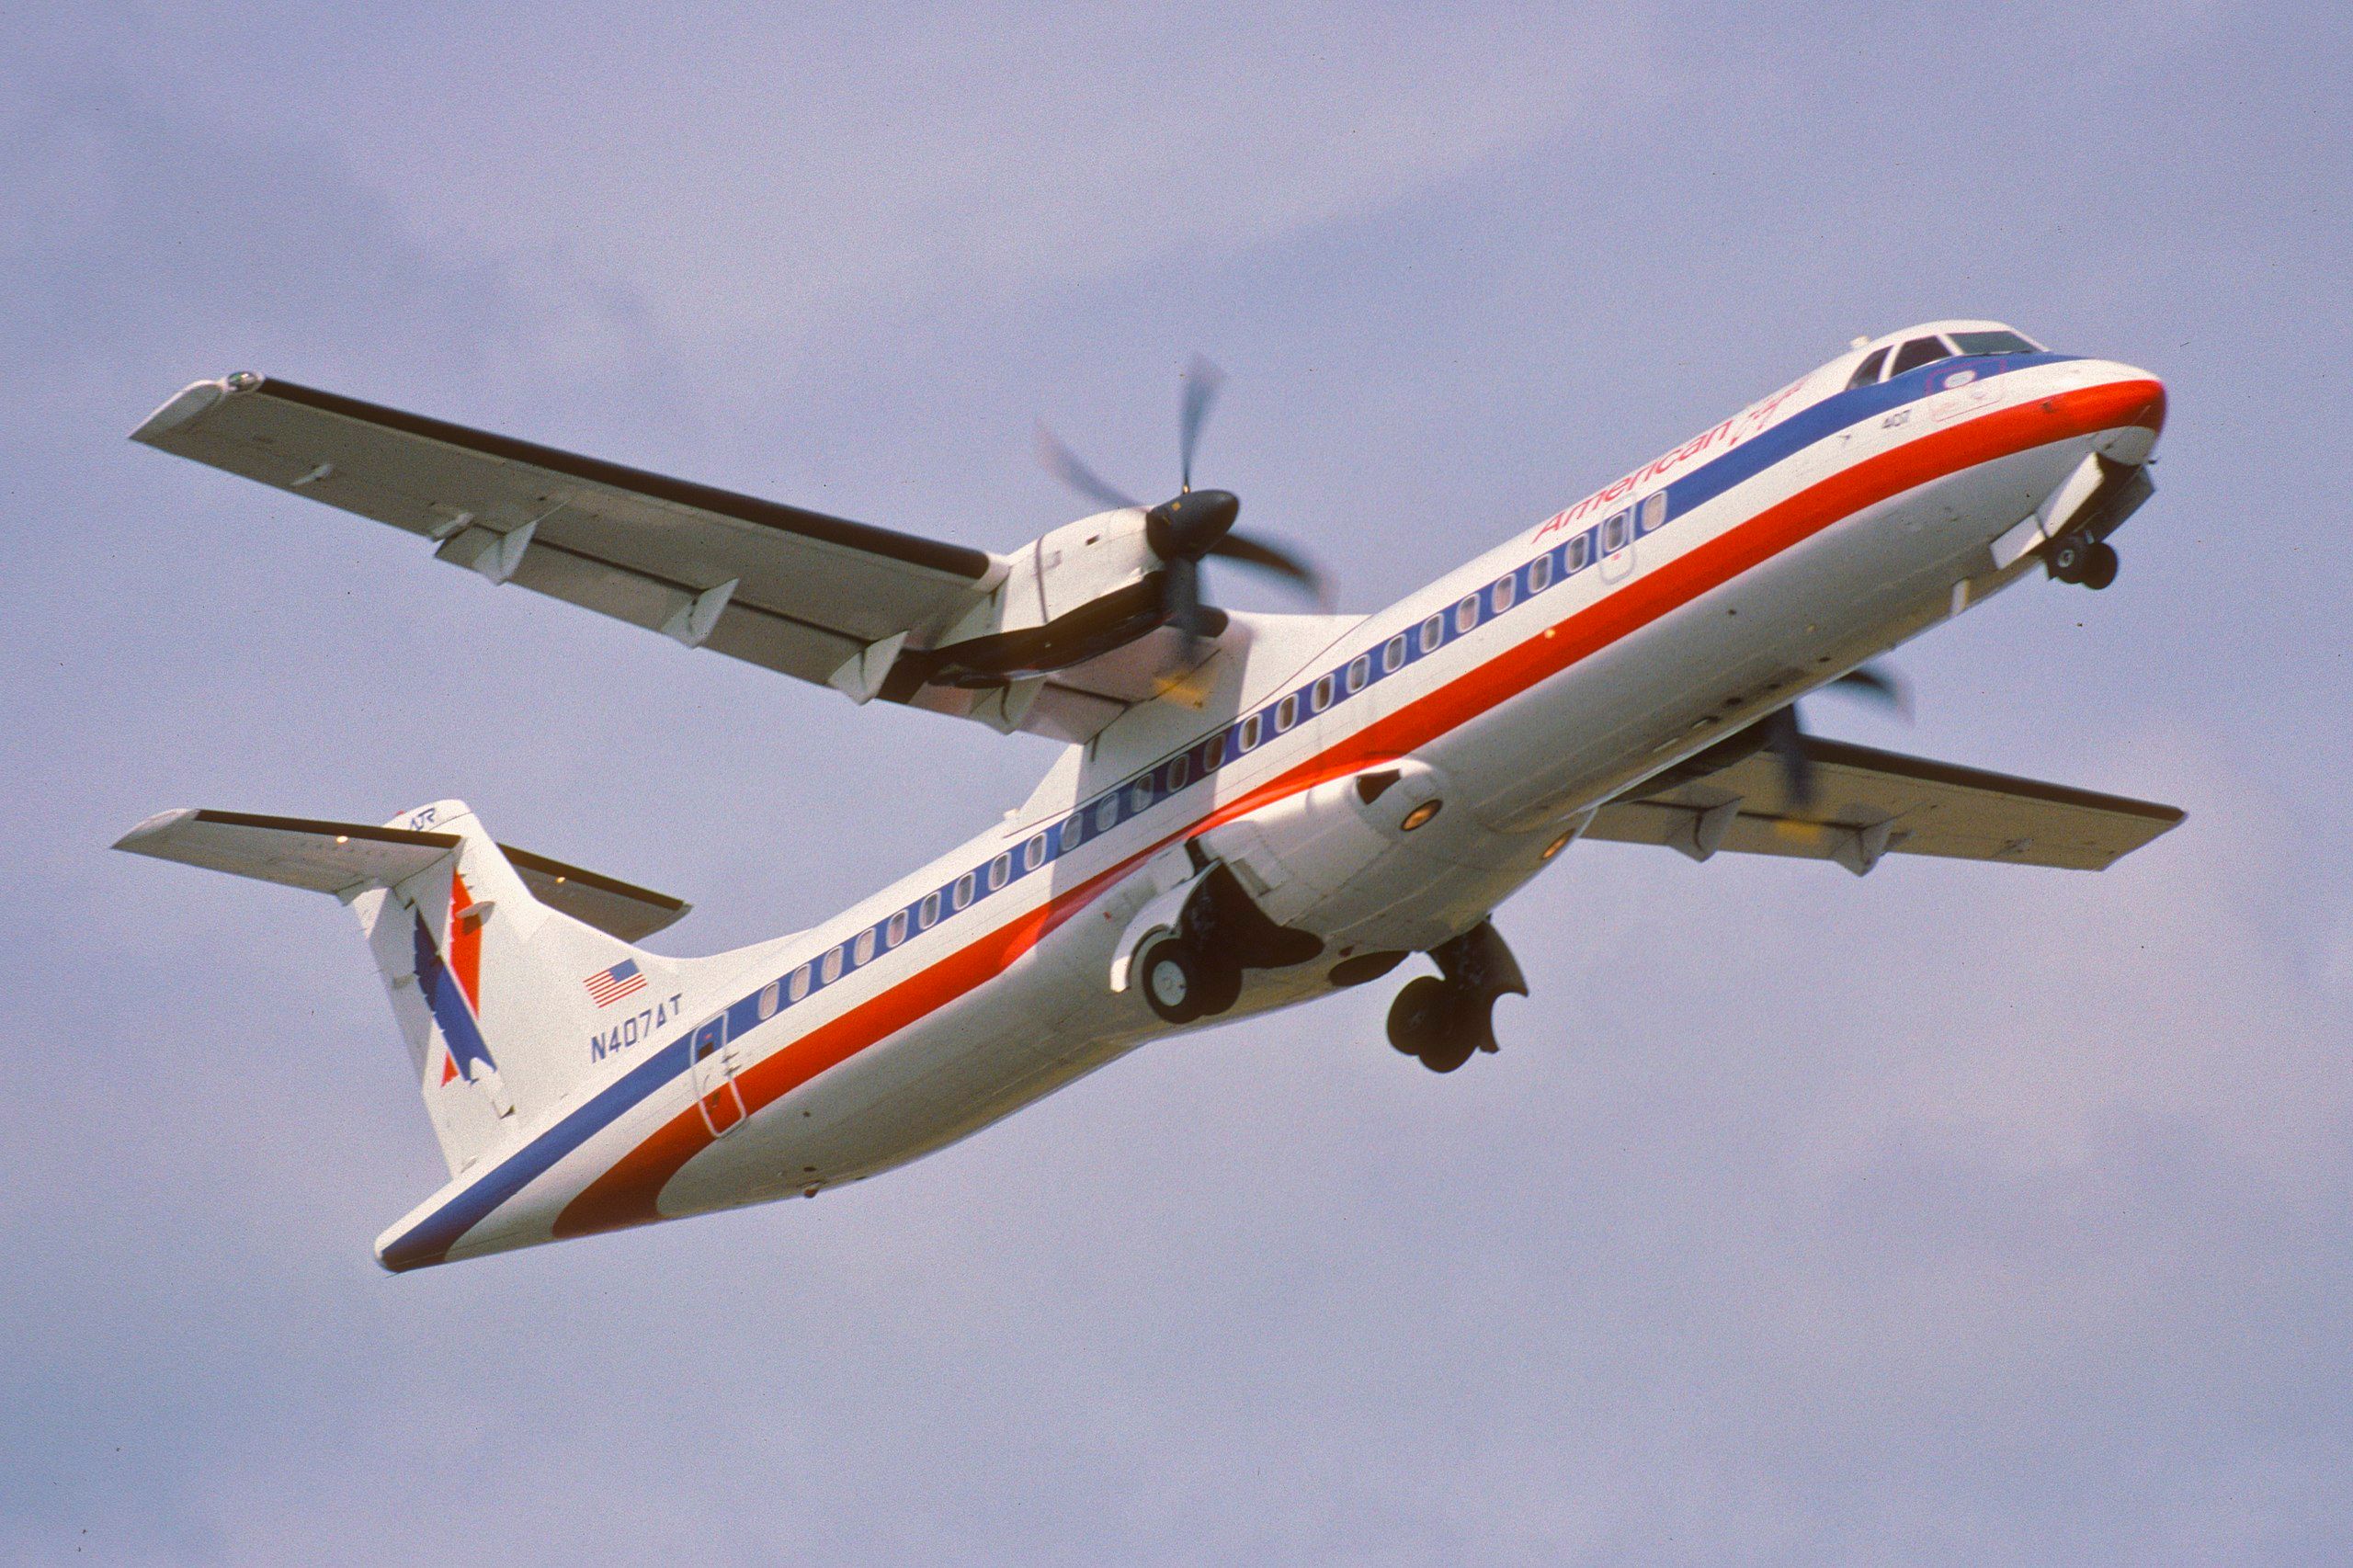 An American Eagle ATR 72-212 flying in the sky.